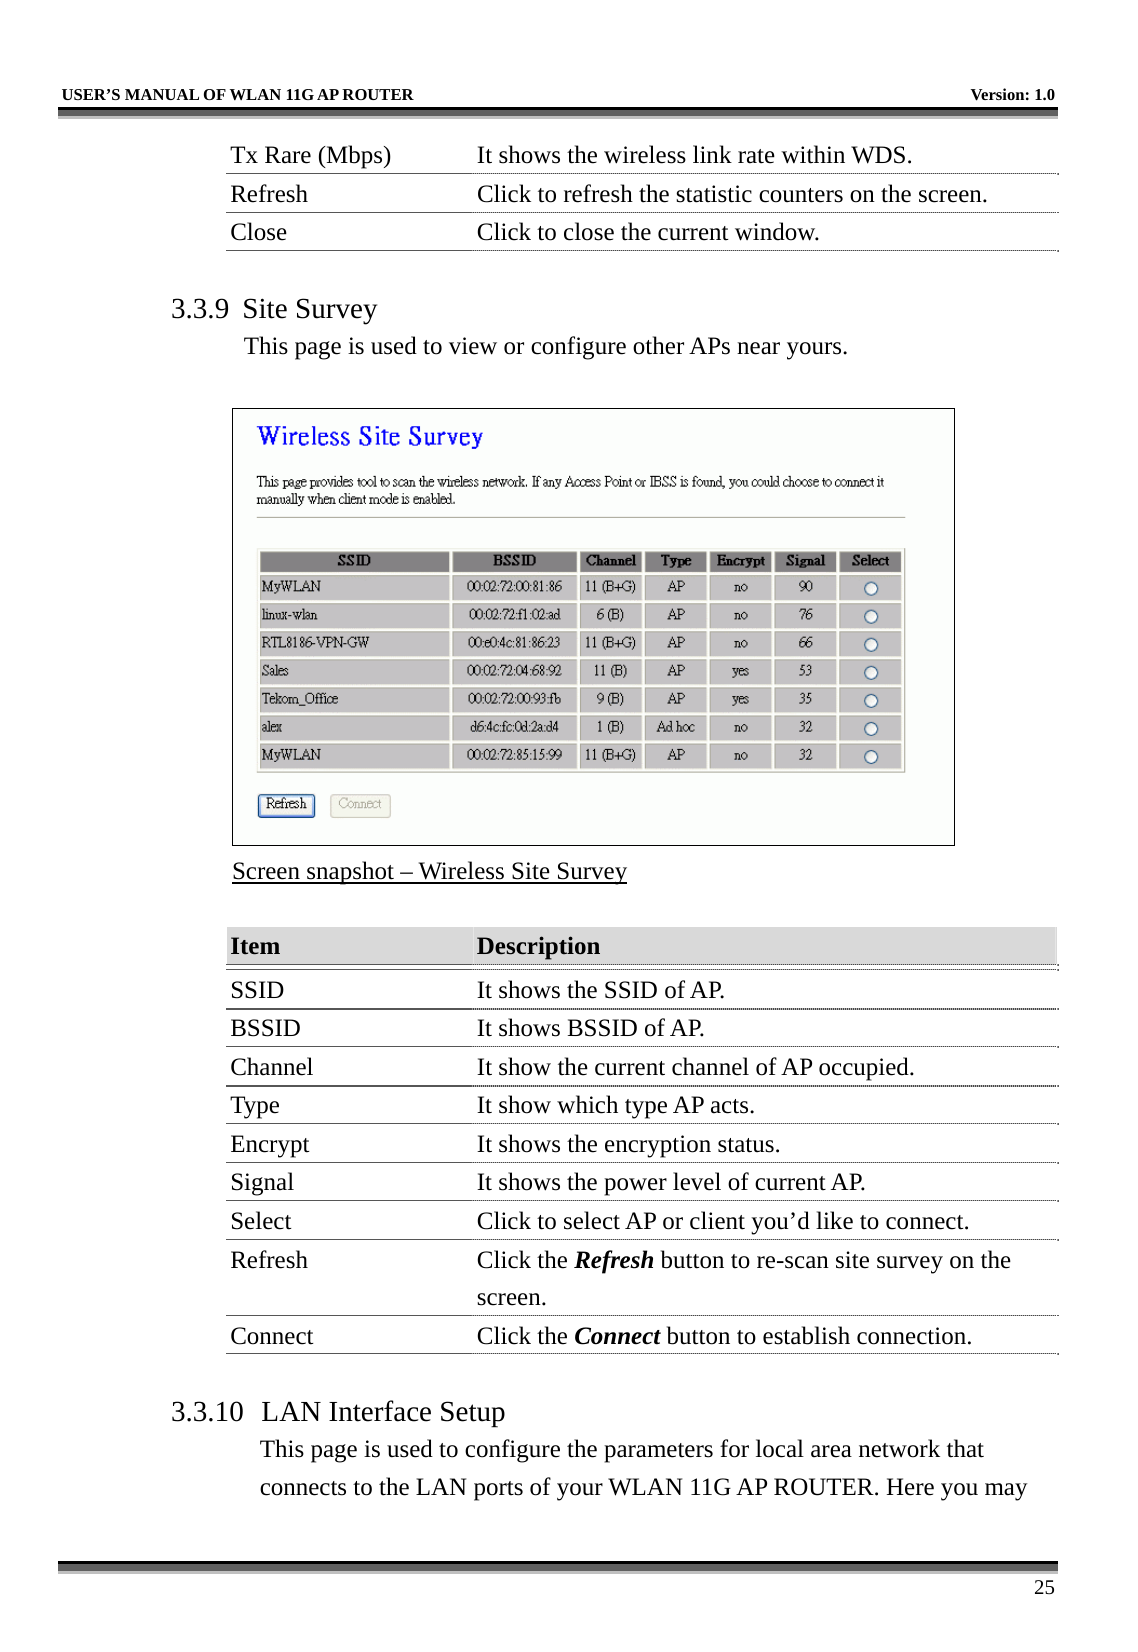   USER’S MANUAL OF WLAN 11G AP ROUTER    Version: 1.0     25 Tx Rare (Mbps)  It shows the wireless link rate within WDS. Refresh  Click to refresh the statistic counters on the screen. Close  Click to close the current window.  3.3.9 Site Survey This page is used to view or configure other APs near yours.   Screen snapshot – Wireless Site Survey  Item  Description   SSID  It shows the SSID of AP. BSSID  It shows BSSID of AP. Channel  It show the current channel of AP occupied. Type  It show which type AP acts. Encrypt  It shows the encryption status. Signal  It shows the power level of current AP. Select  Click to select AP or client you’d like to connect. Refresh Click the Refresh button to re-scan site survey on the screen. Connect Click the Connect button to establish connection.  3.3.10  LAN Interface Setup This page is used to configure the parameters for local area network that connects to the LAN ports of your WLAN 11G AP ROUTER. Here you may 